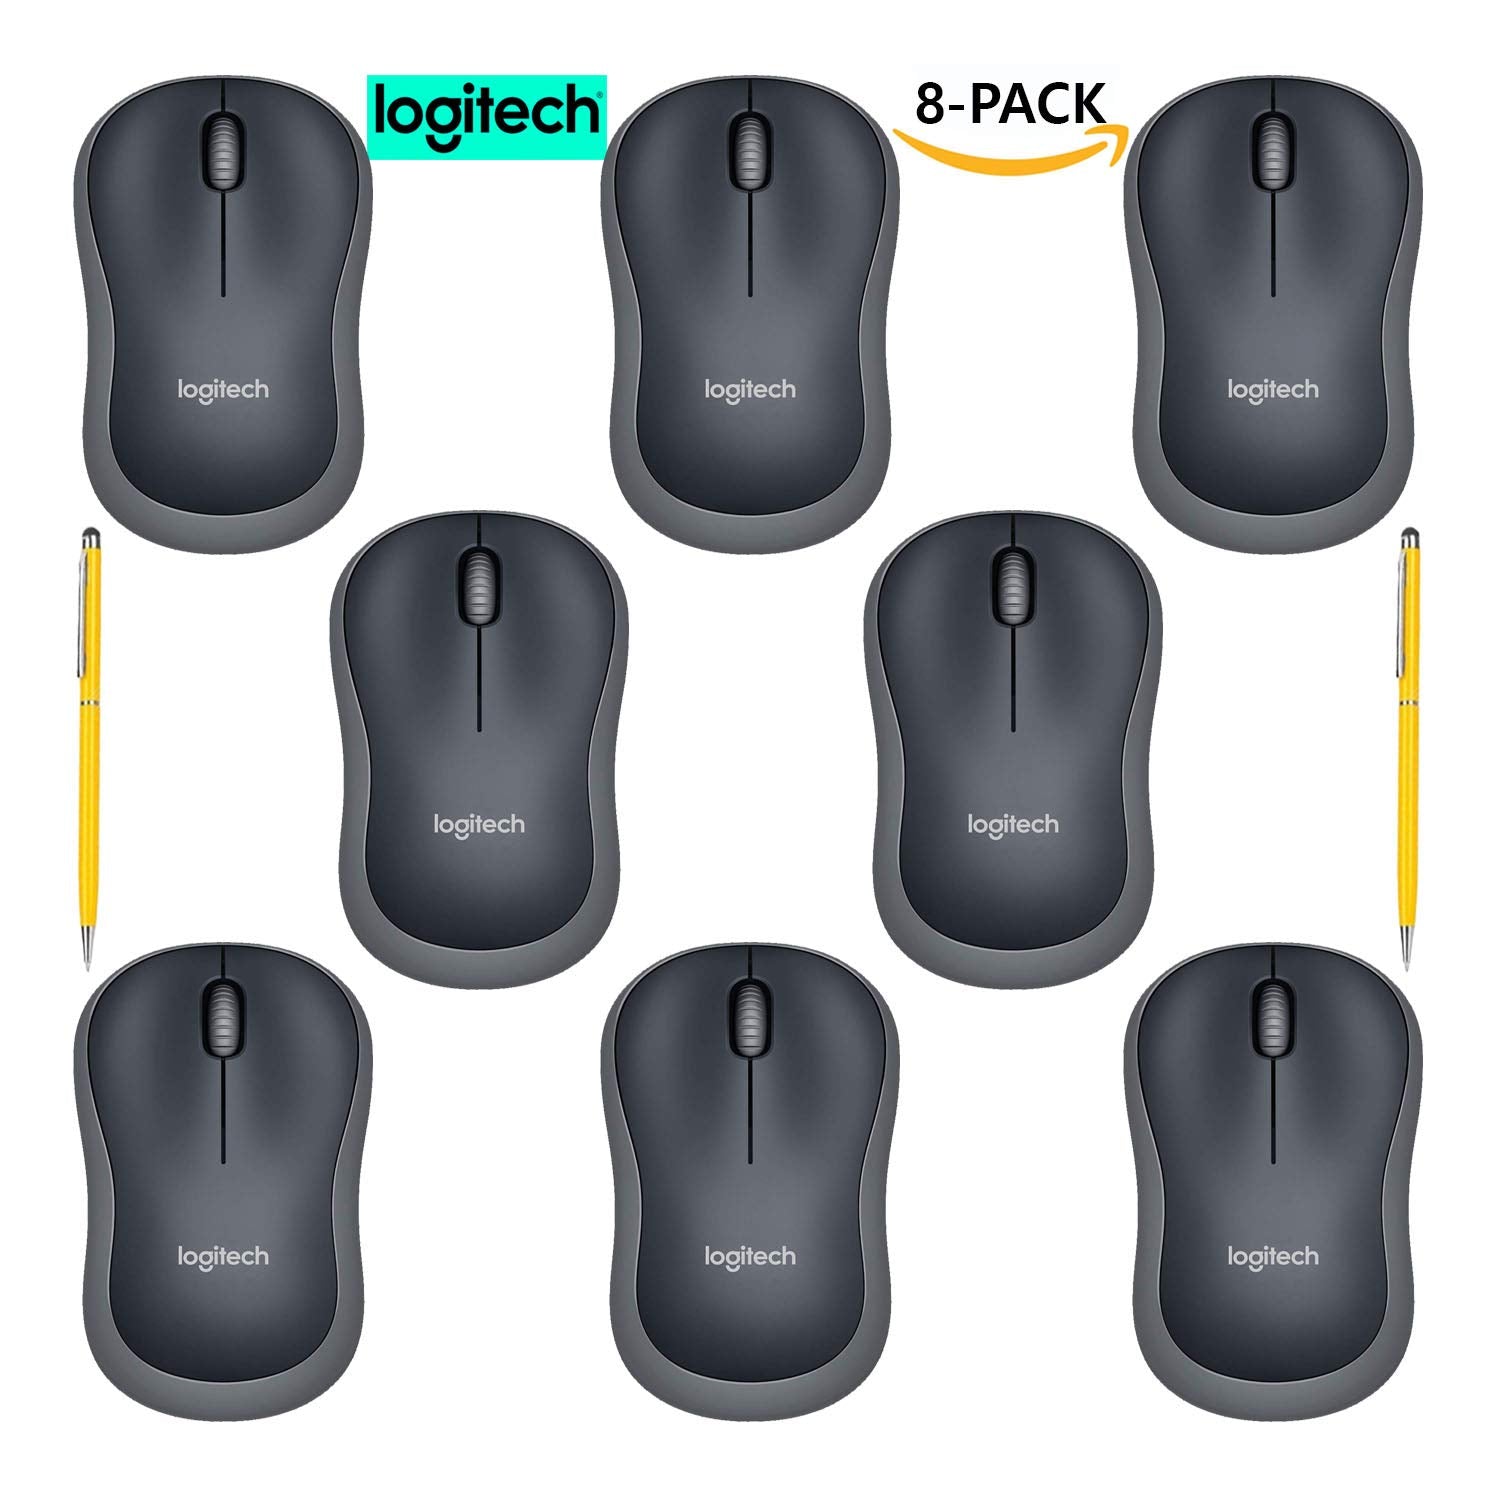 Logitech M185 Wireless Mouse for Computers Laptops Fast Scrolling Bundle (8-Pack + Stylus)